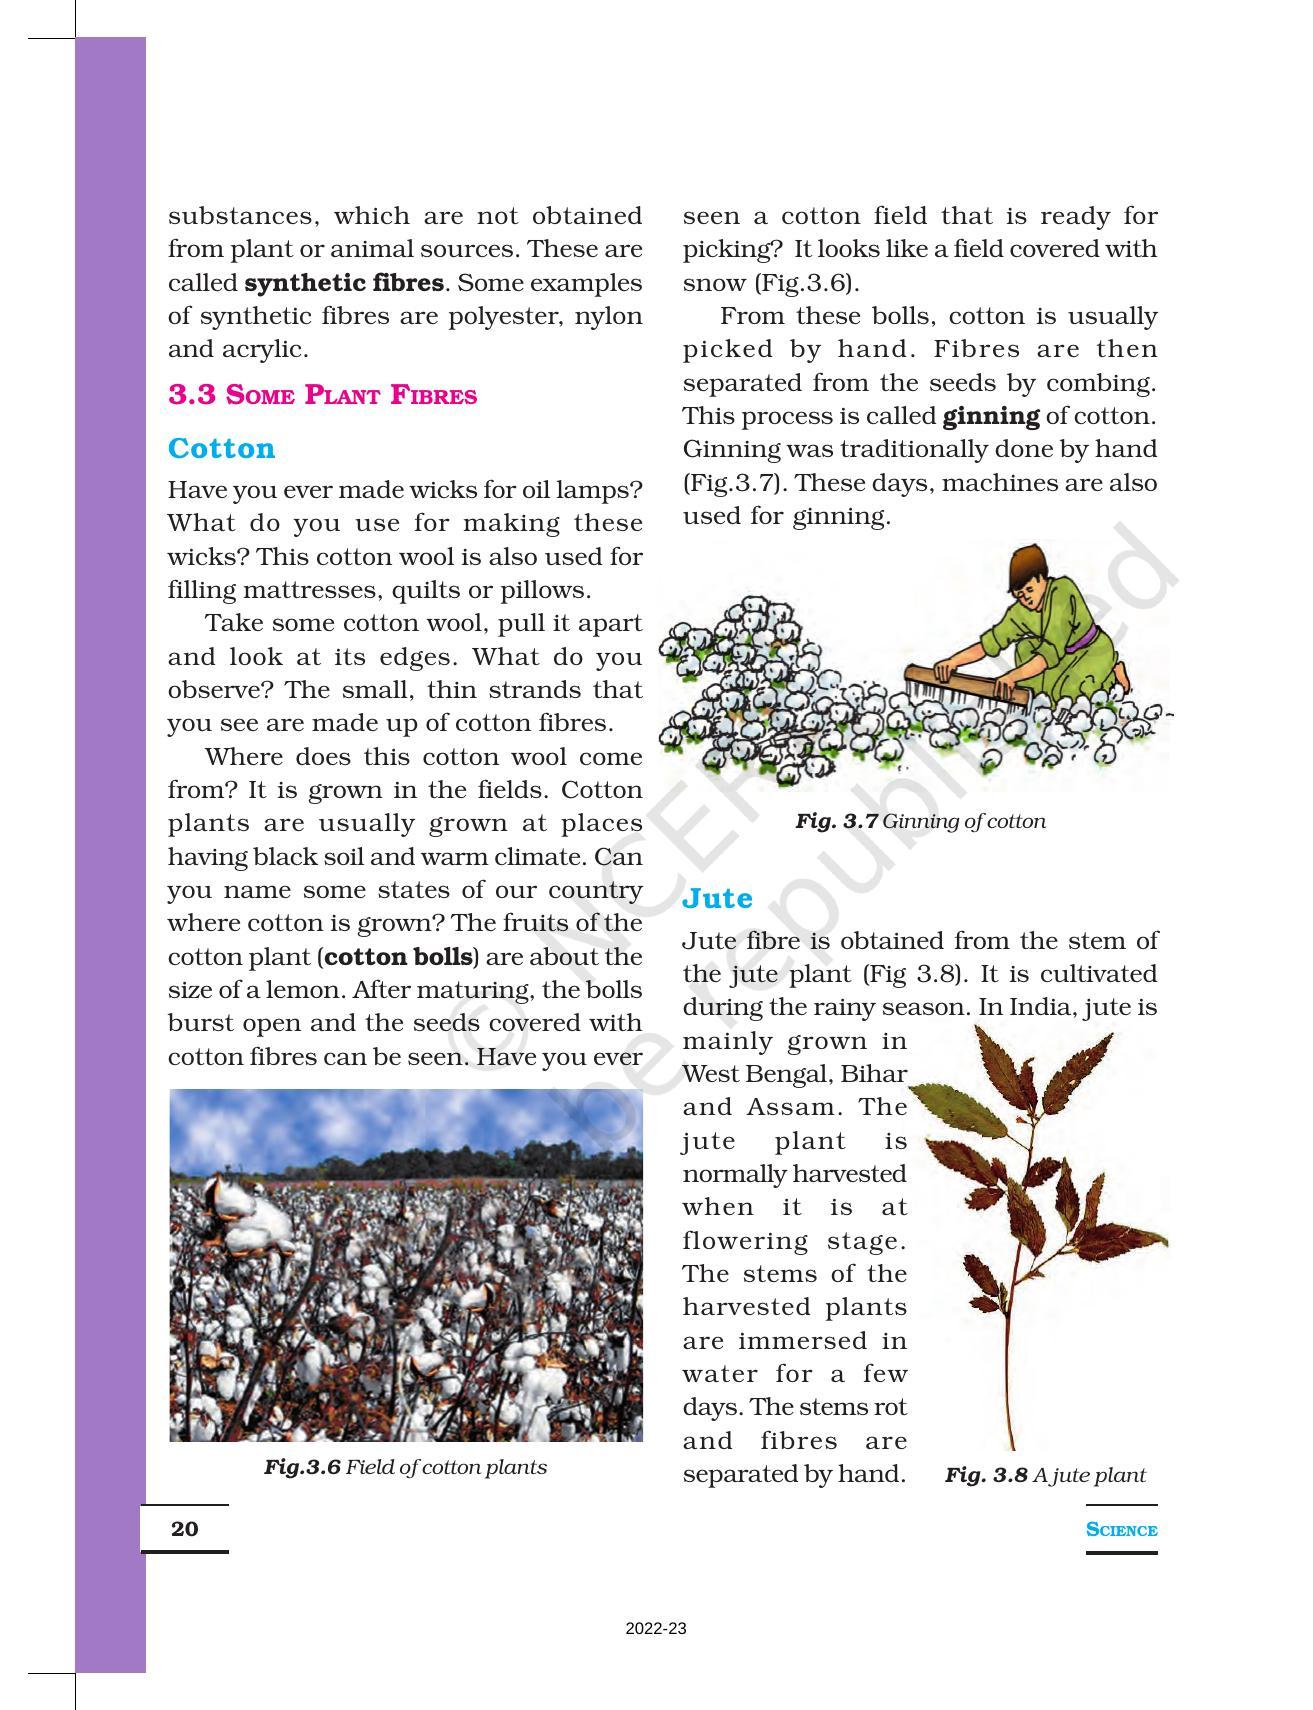 NCERT Book for Class 6 Science: Chapter 3-Fibre to Fabric - Page 3